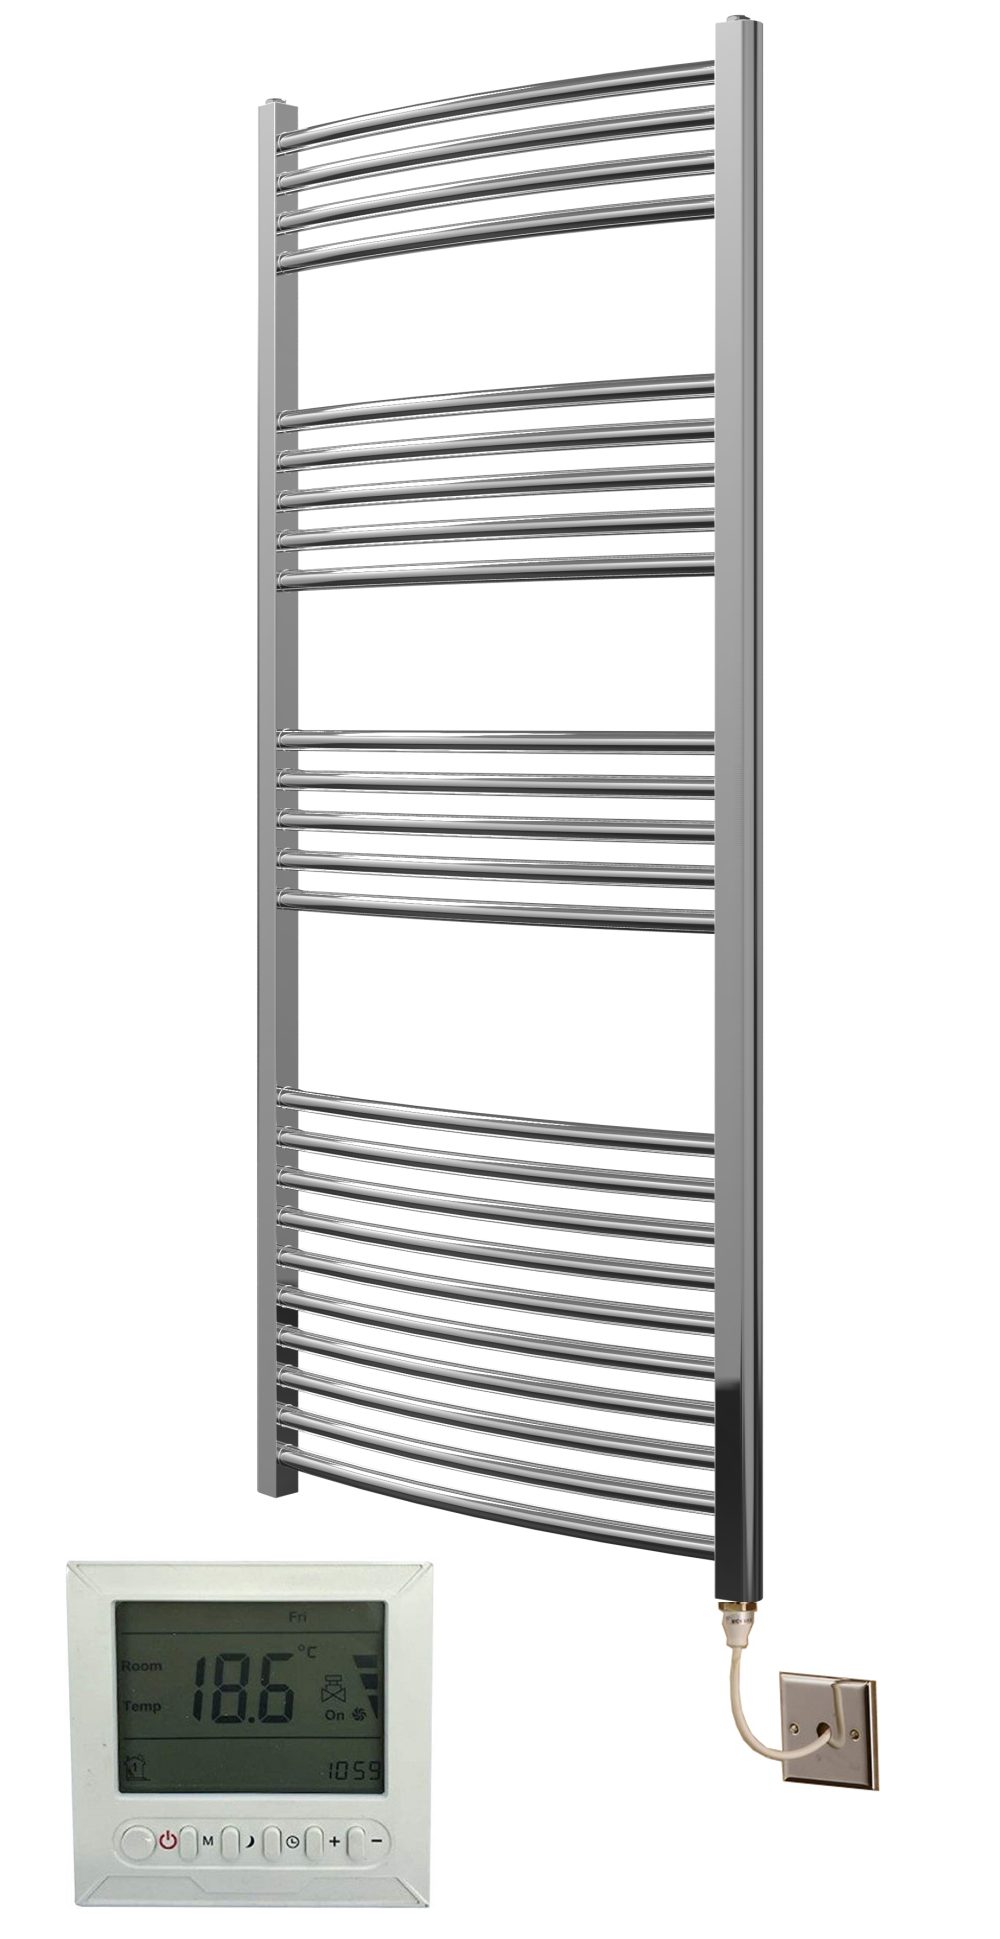 Curved Chrome Electric Towel Rails with thermostat